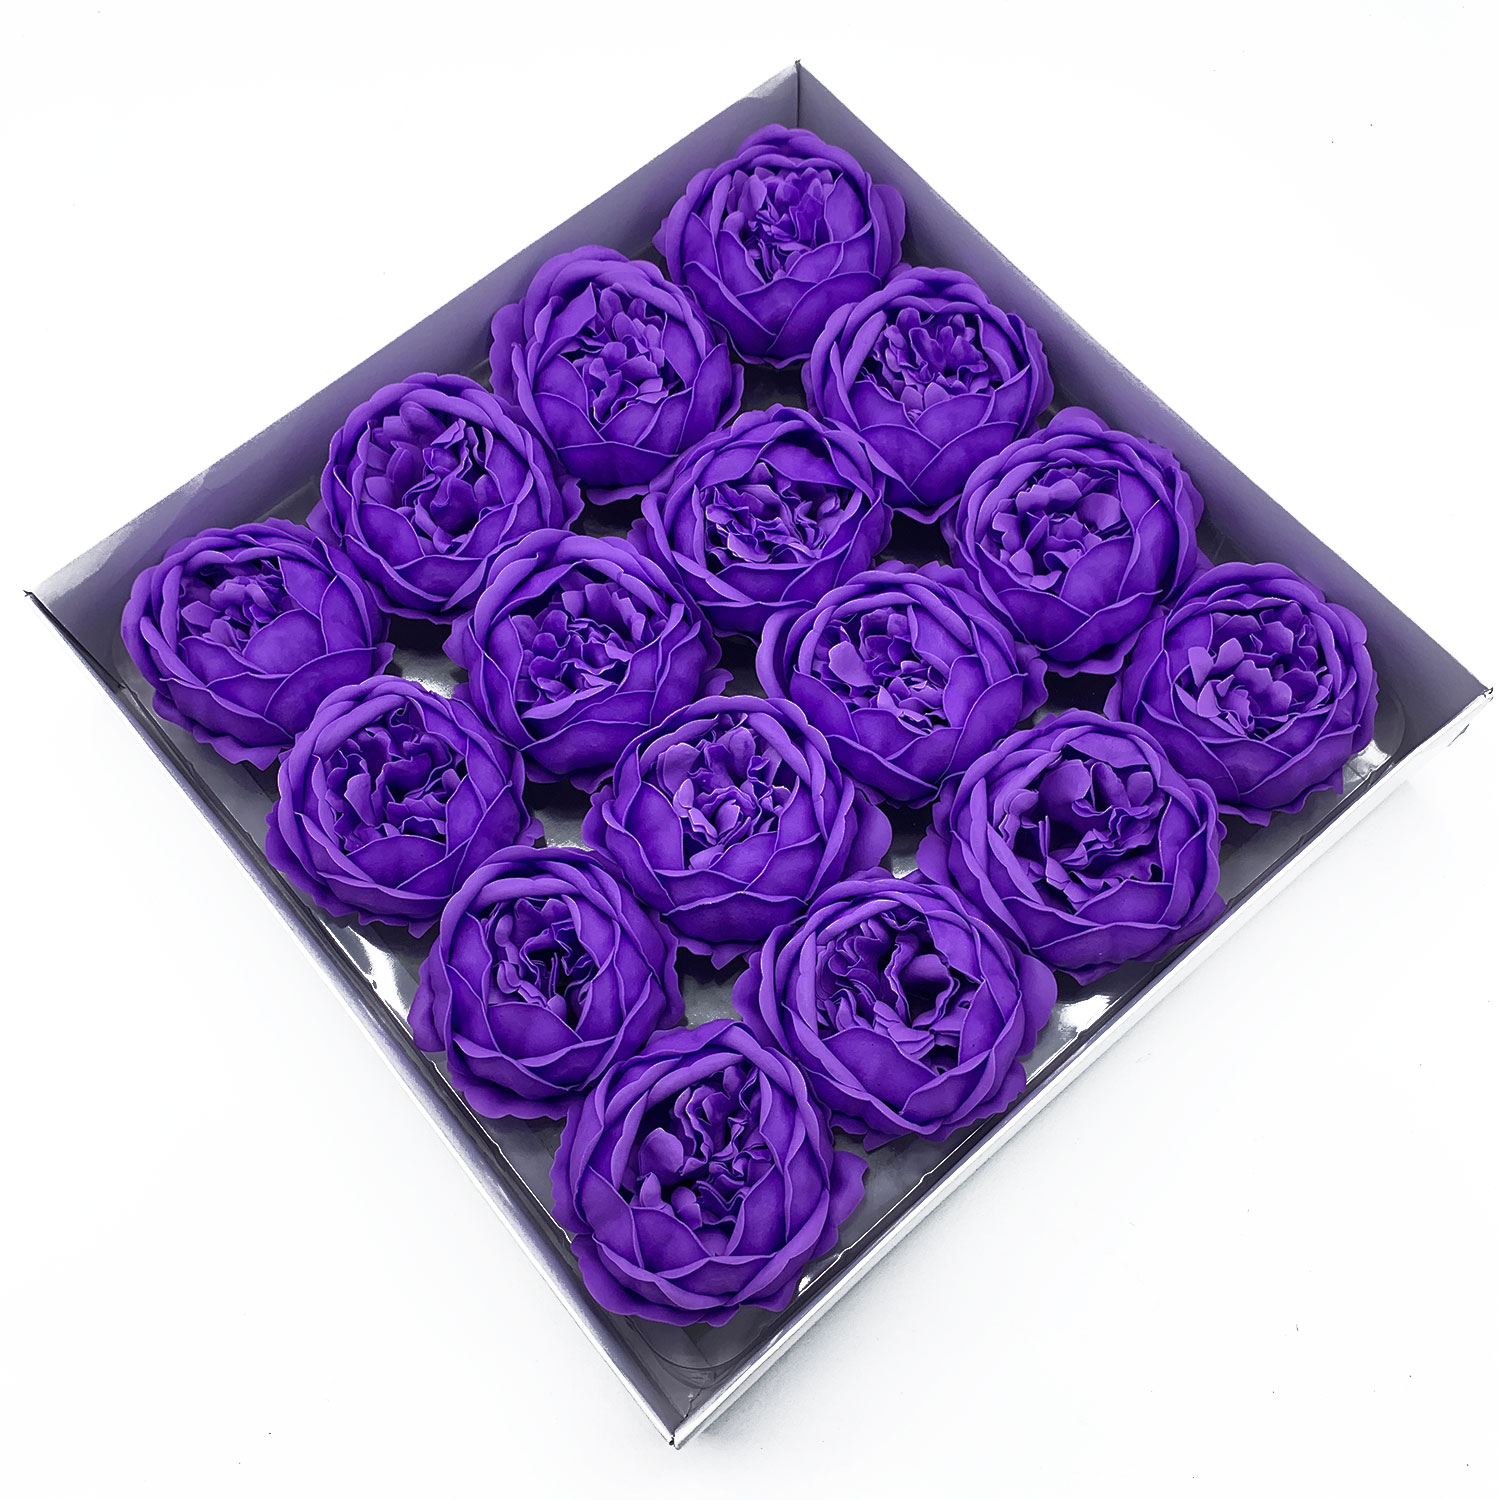 10 x Craft Soap Flowers - Ext Large Peony - Lavender